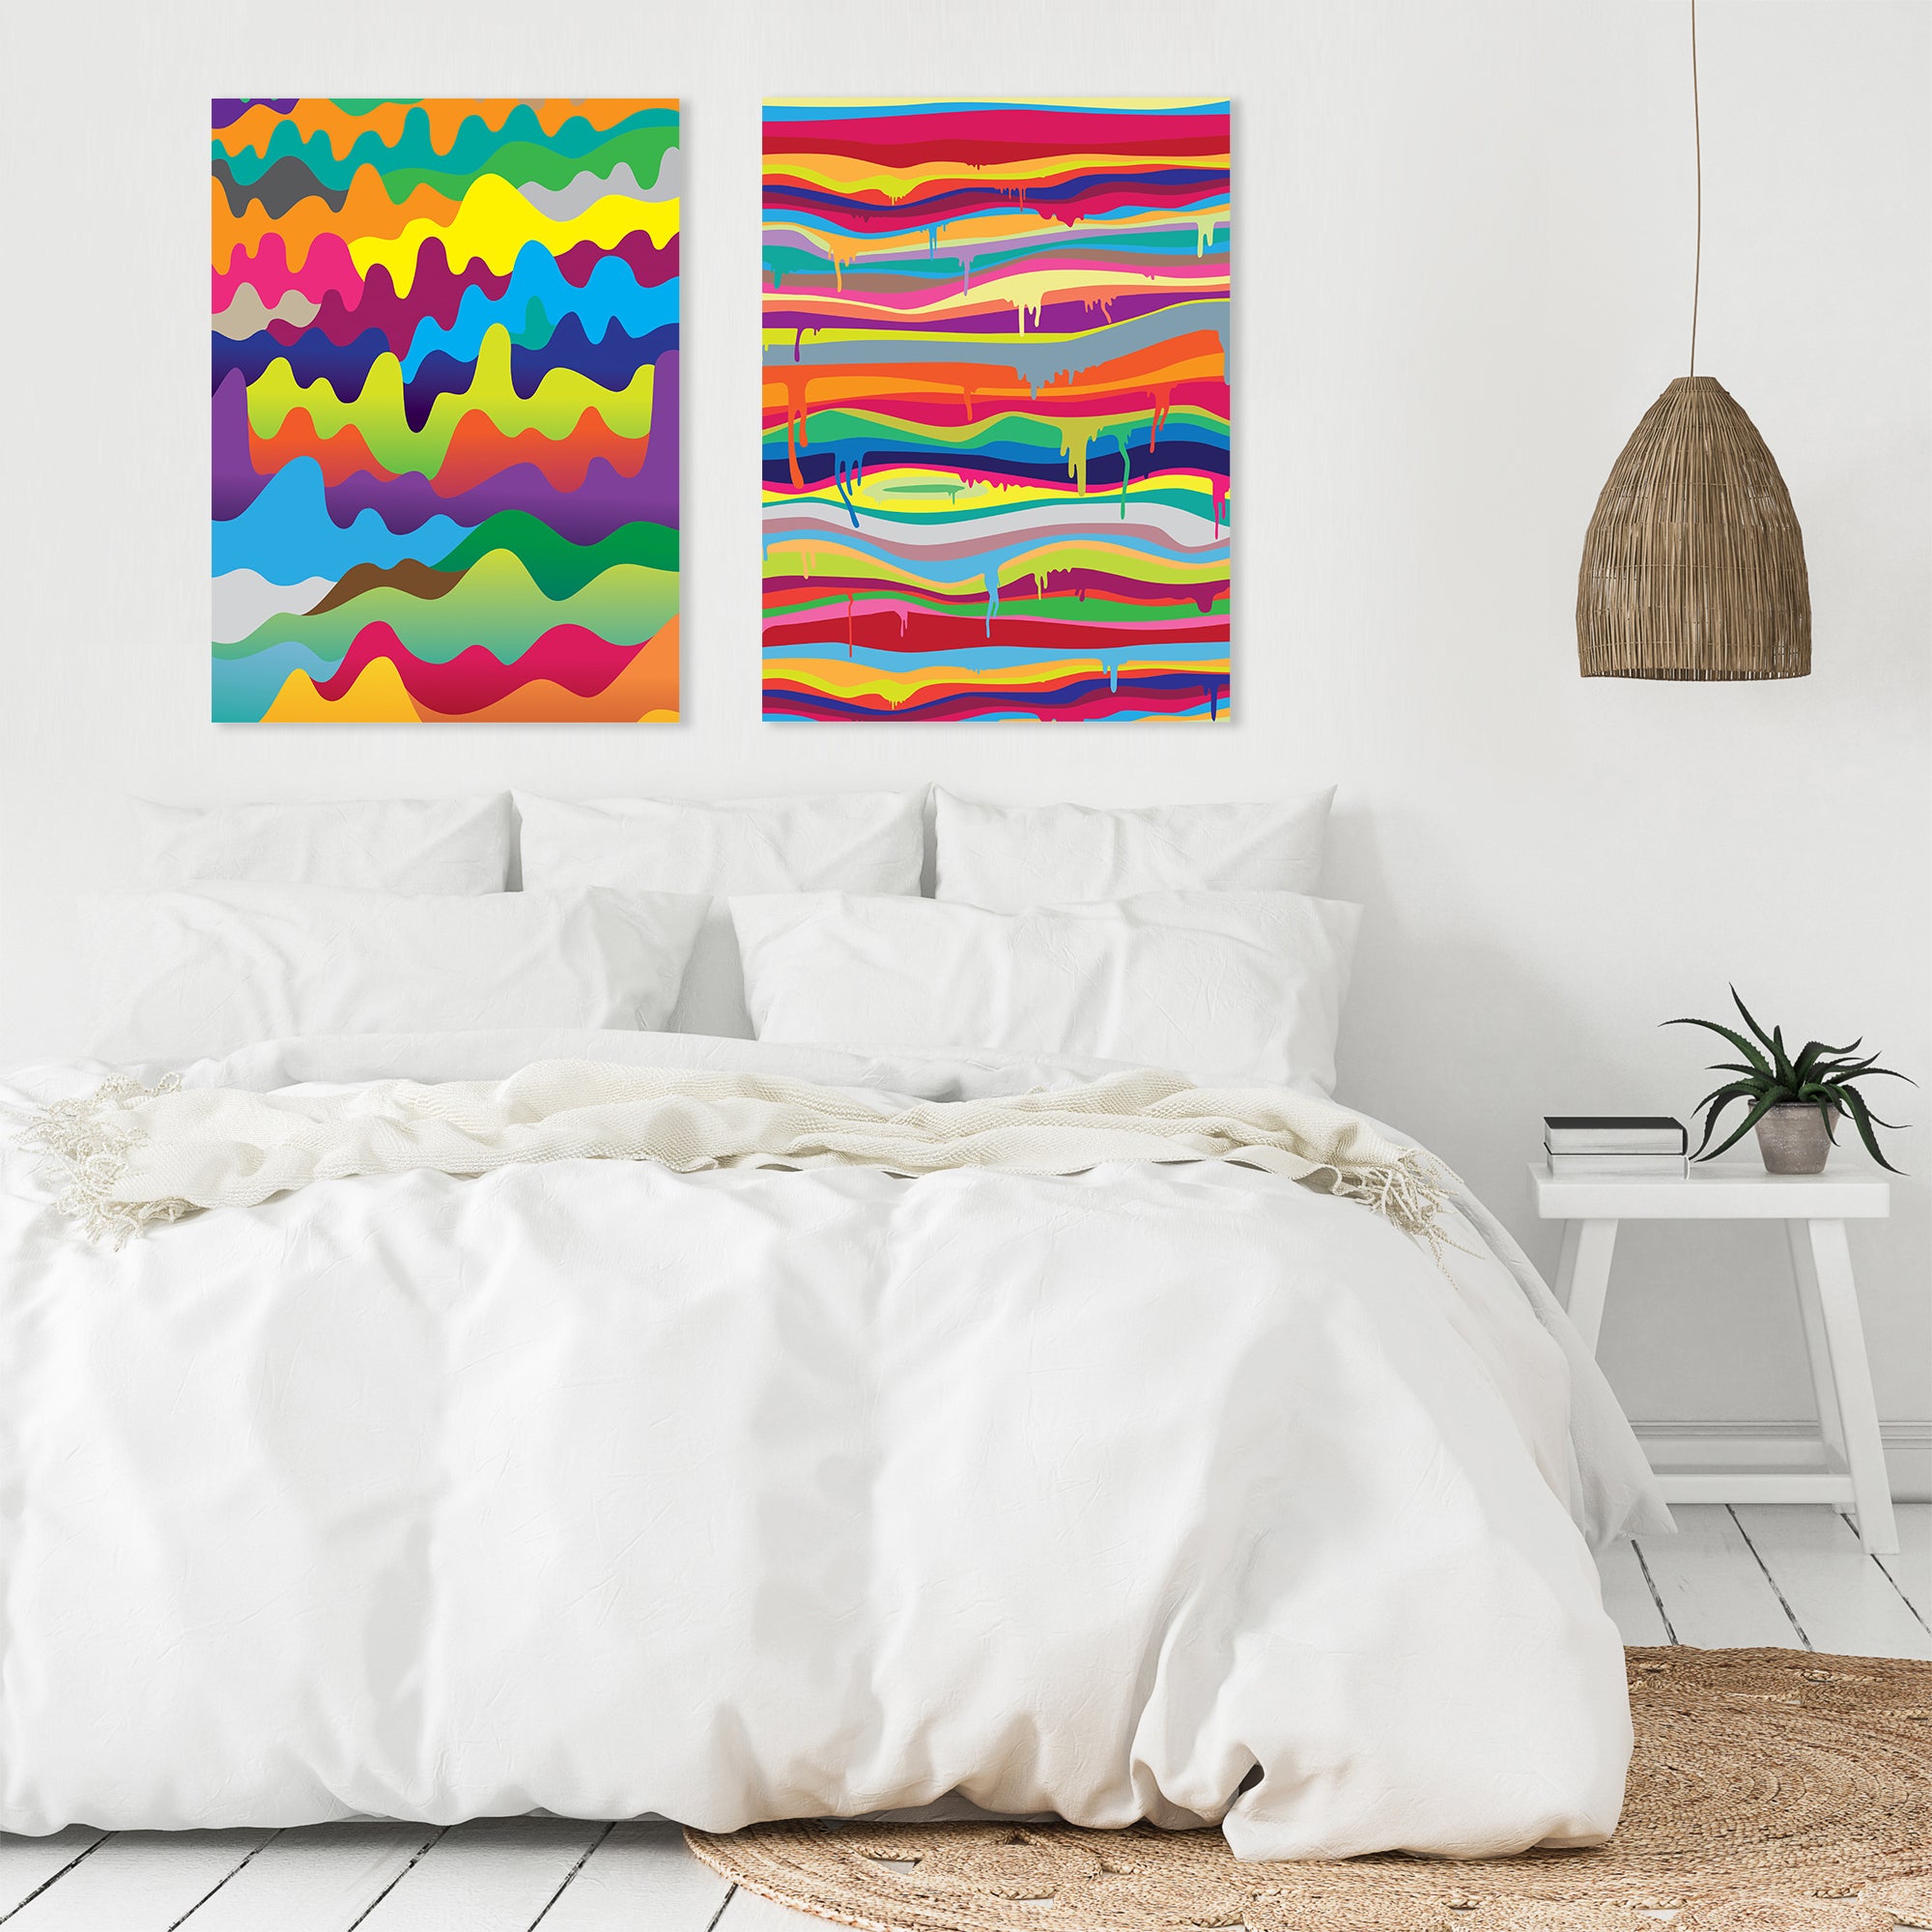 The Melting by Joe Van Wetering - 2 Piece Wrapped Canvas Set - Americanflat